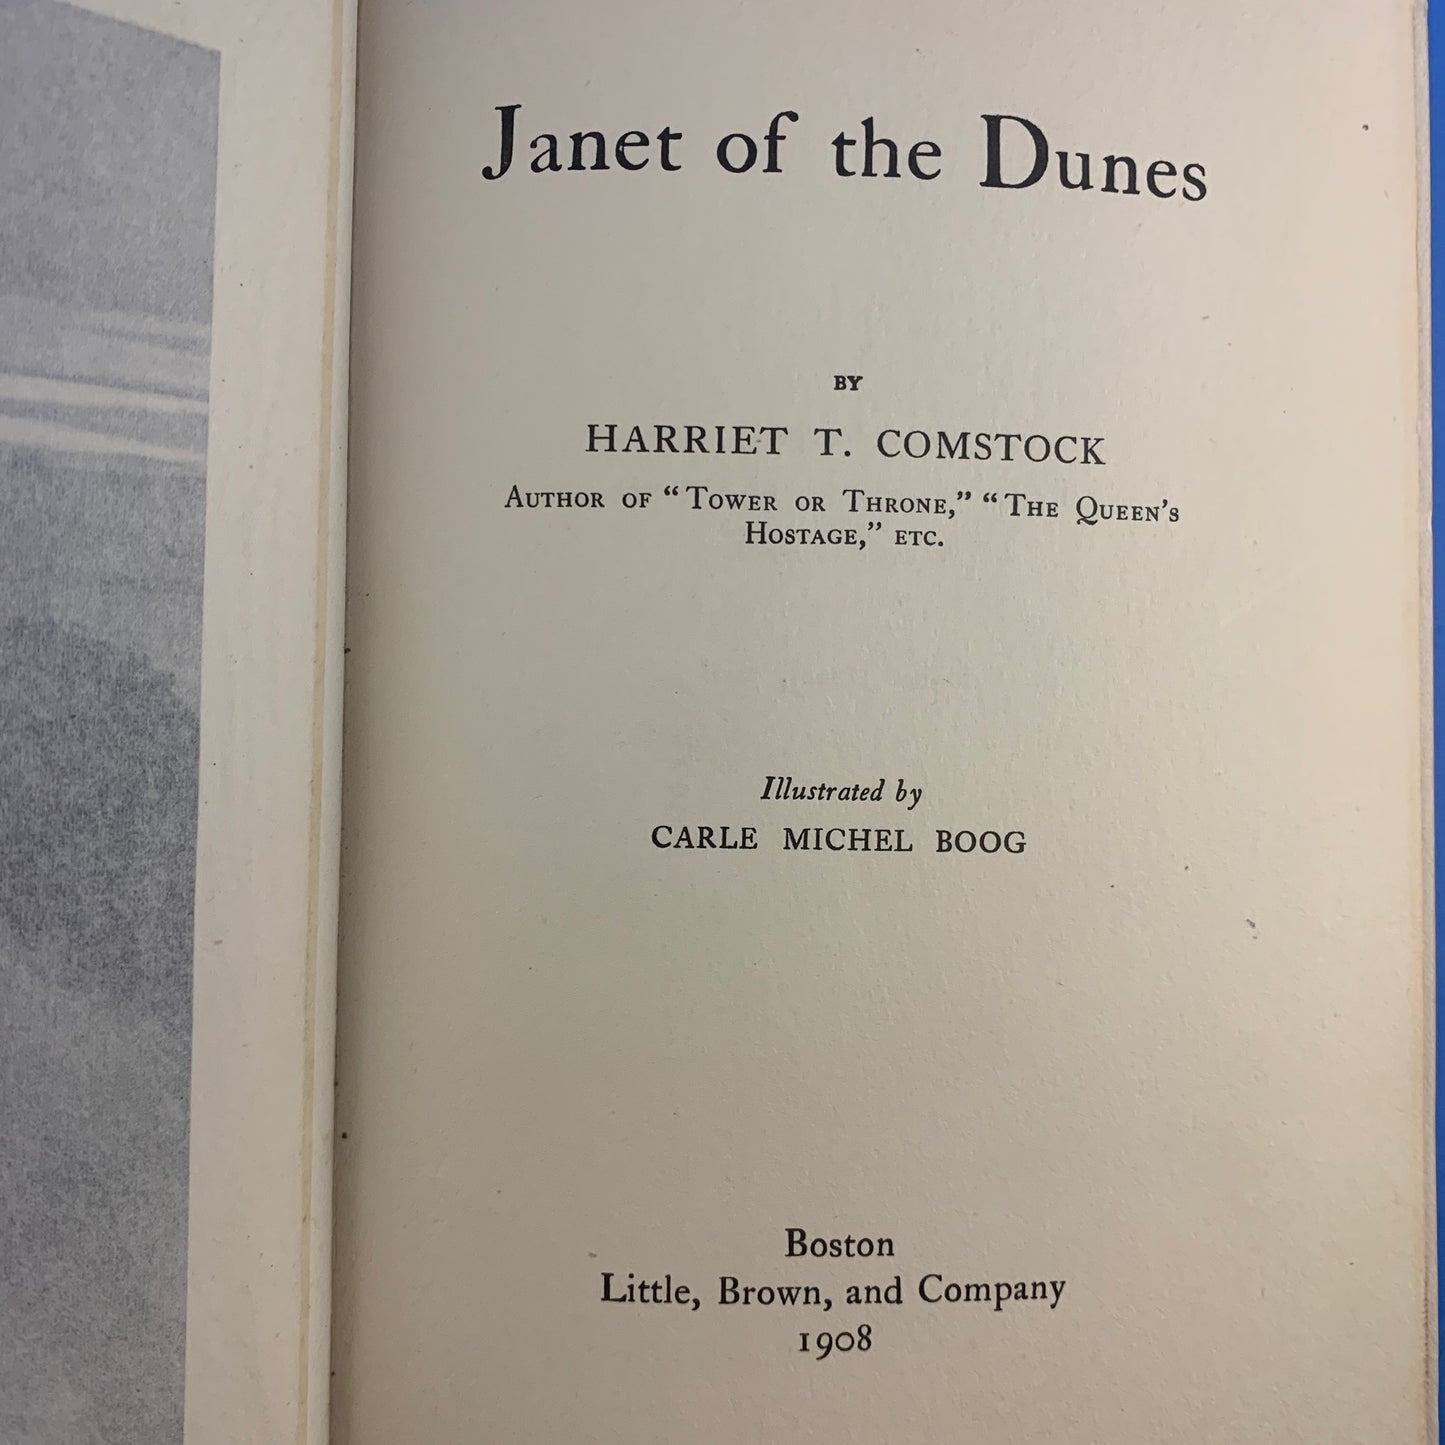 Janet of the Dunes